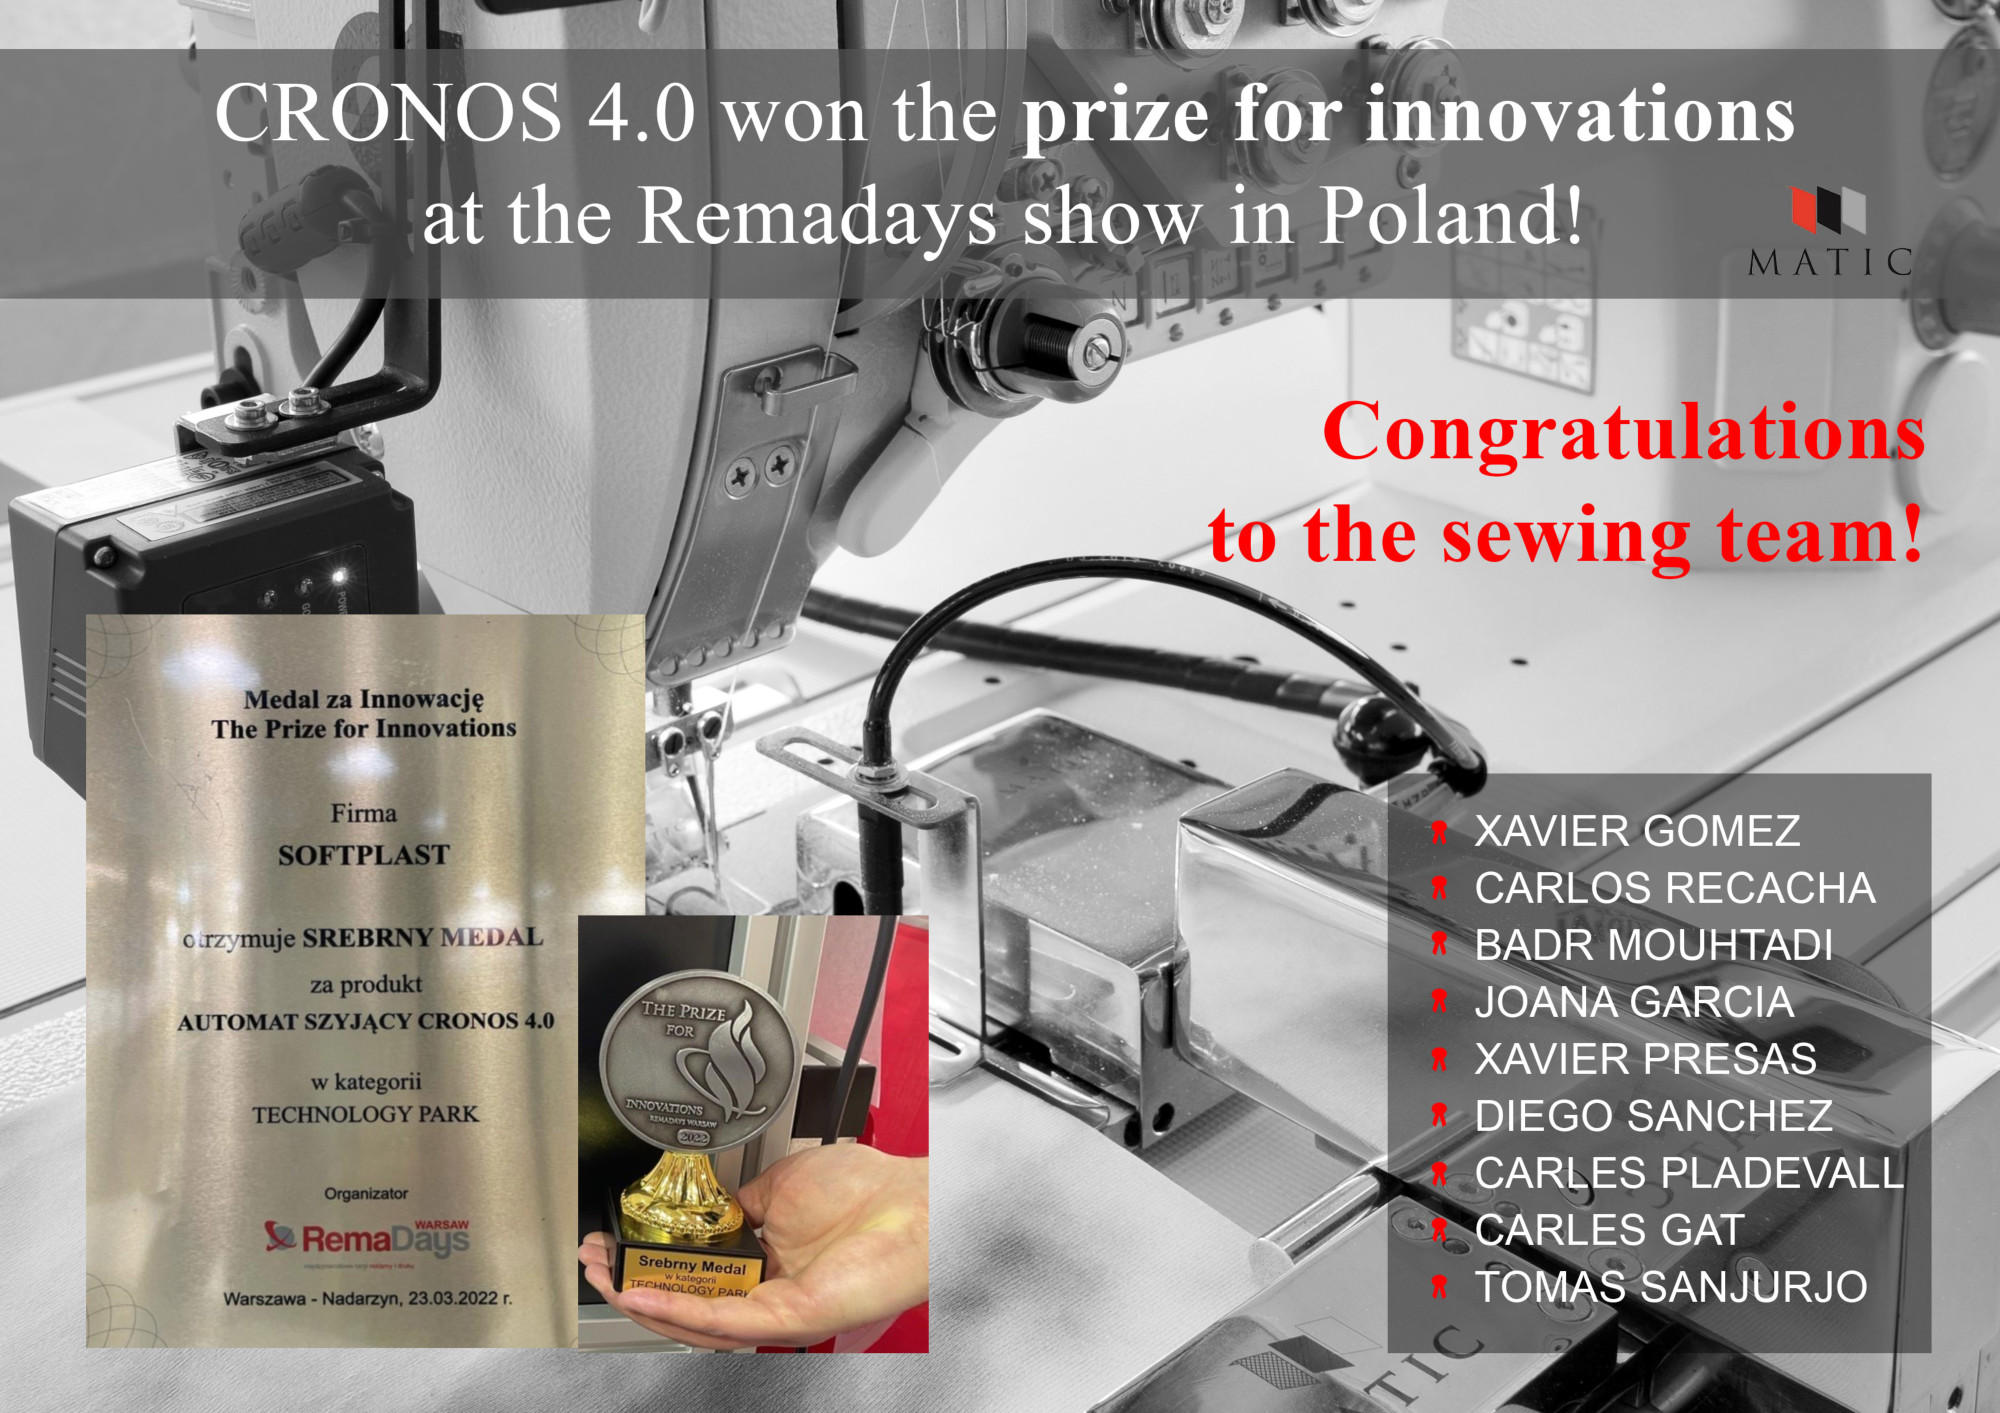 Cronos 4.0 won the prize for Innovations at RemaDays Show in Poland! 